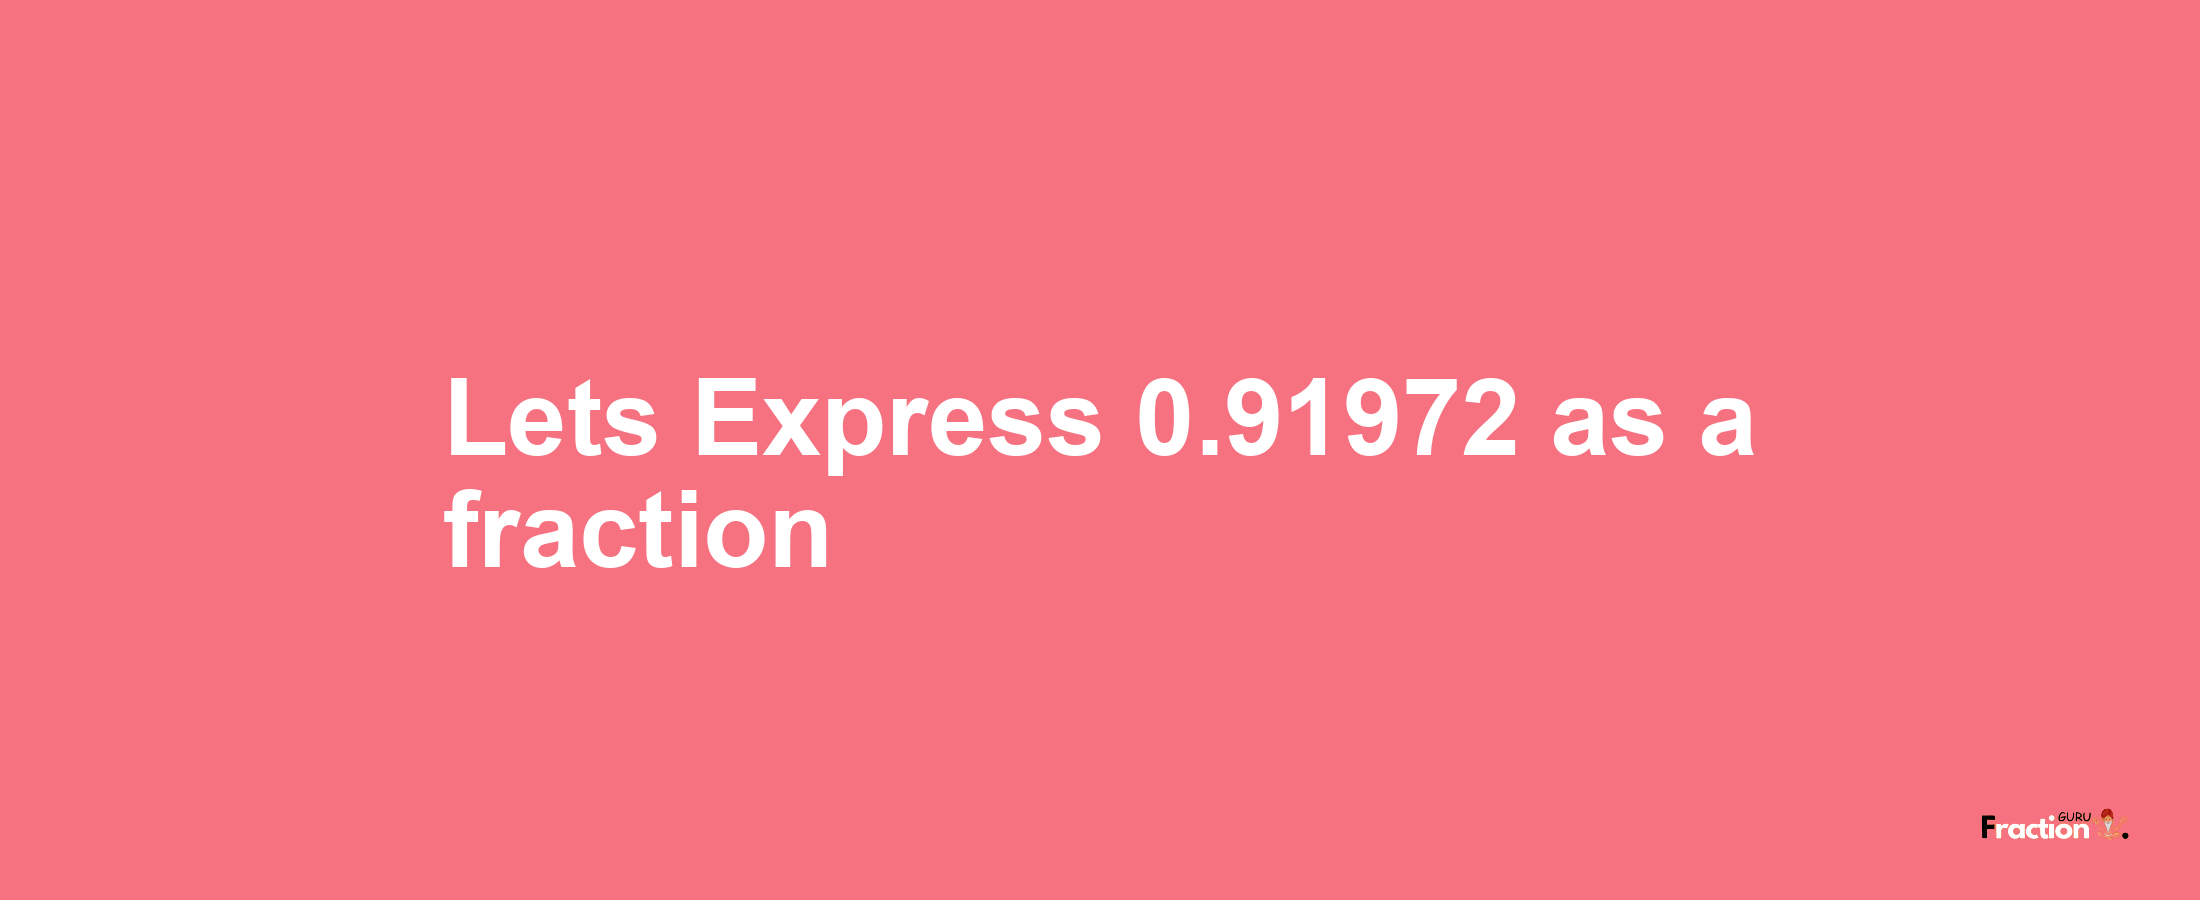 Lets Express 0.91972 as afraction